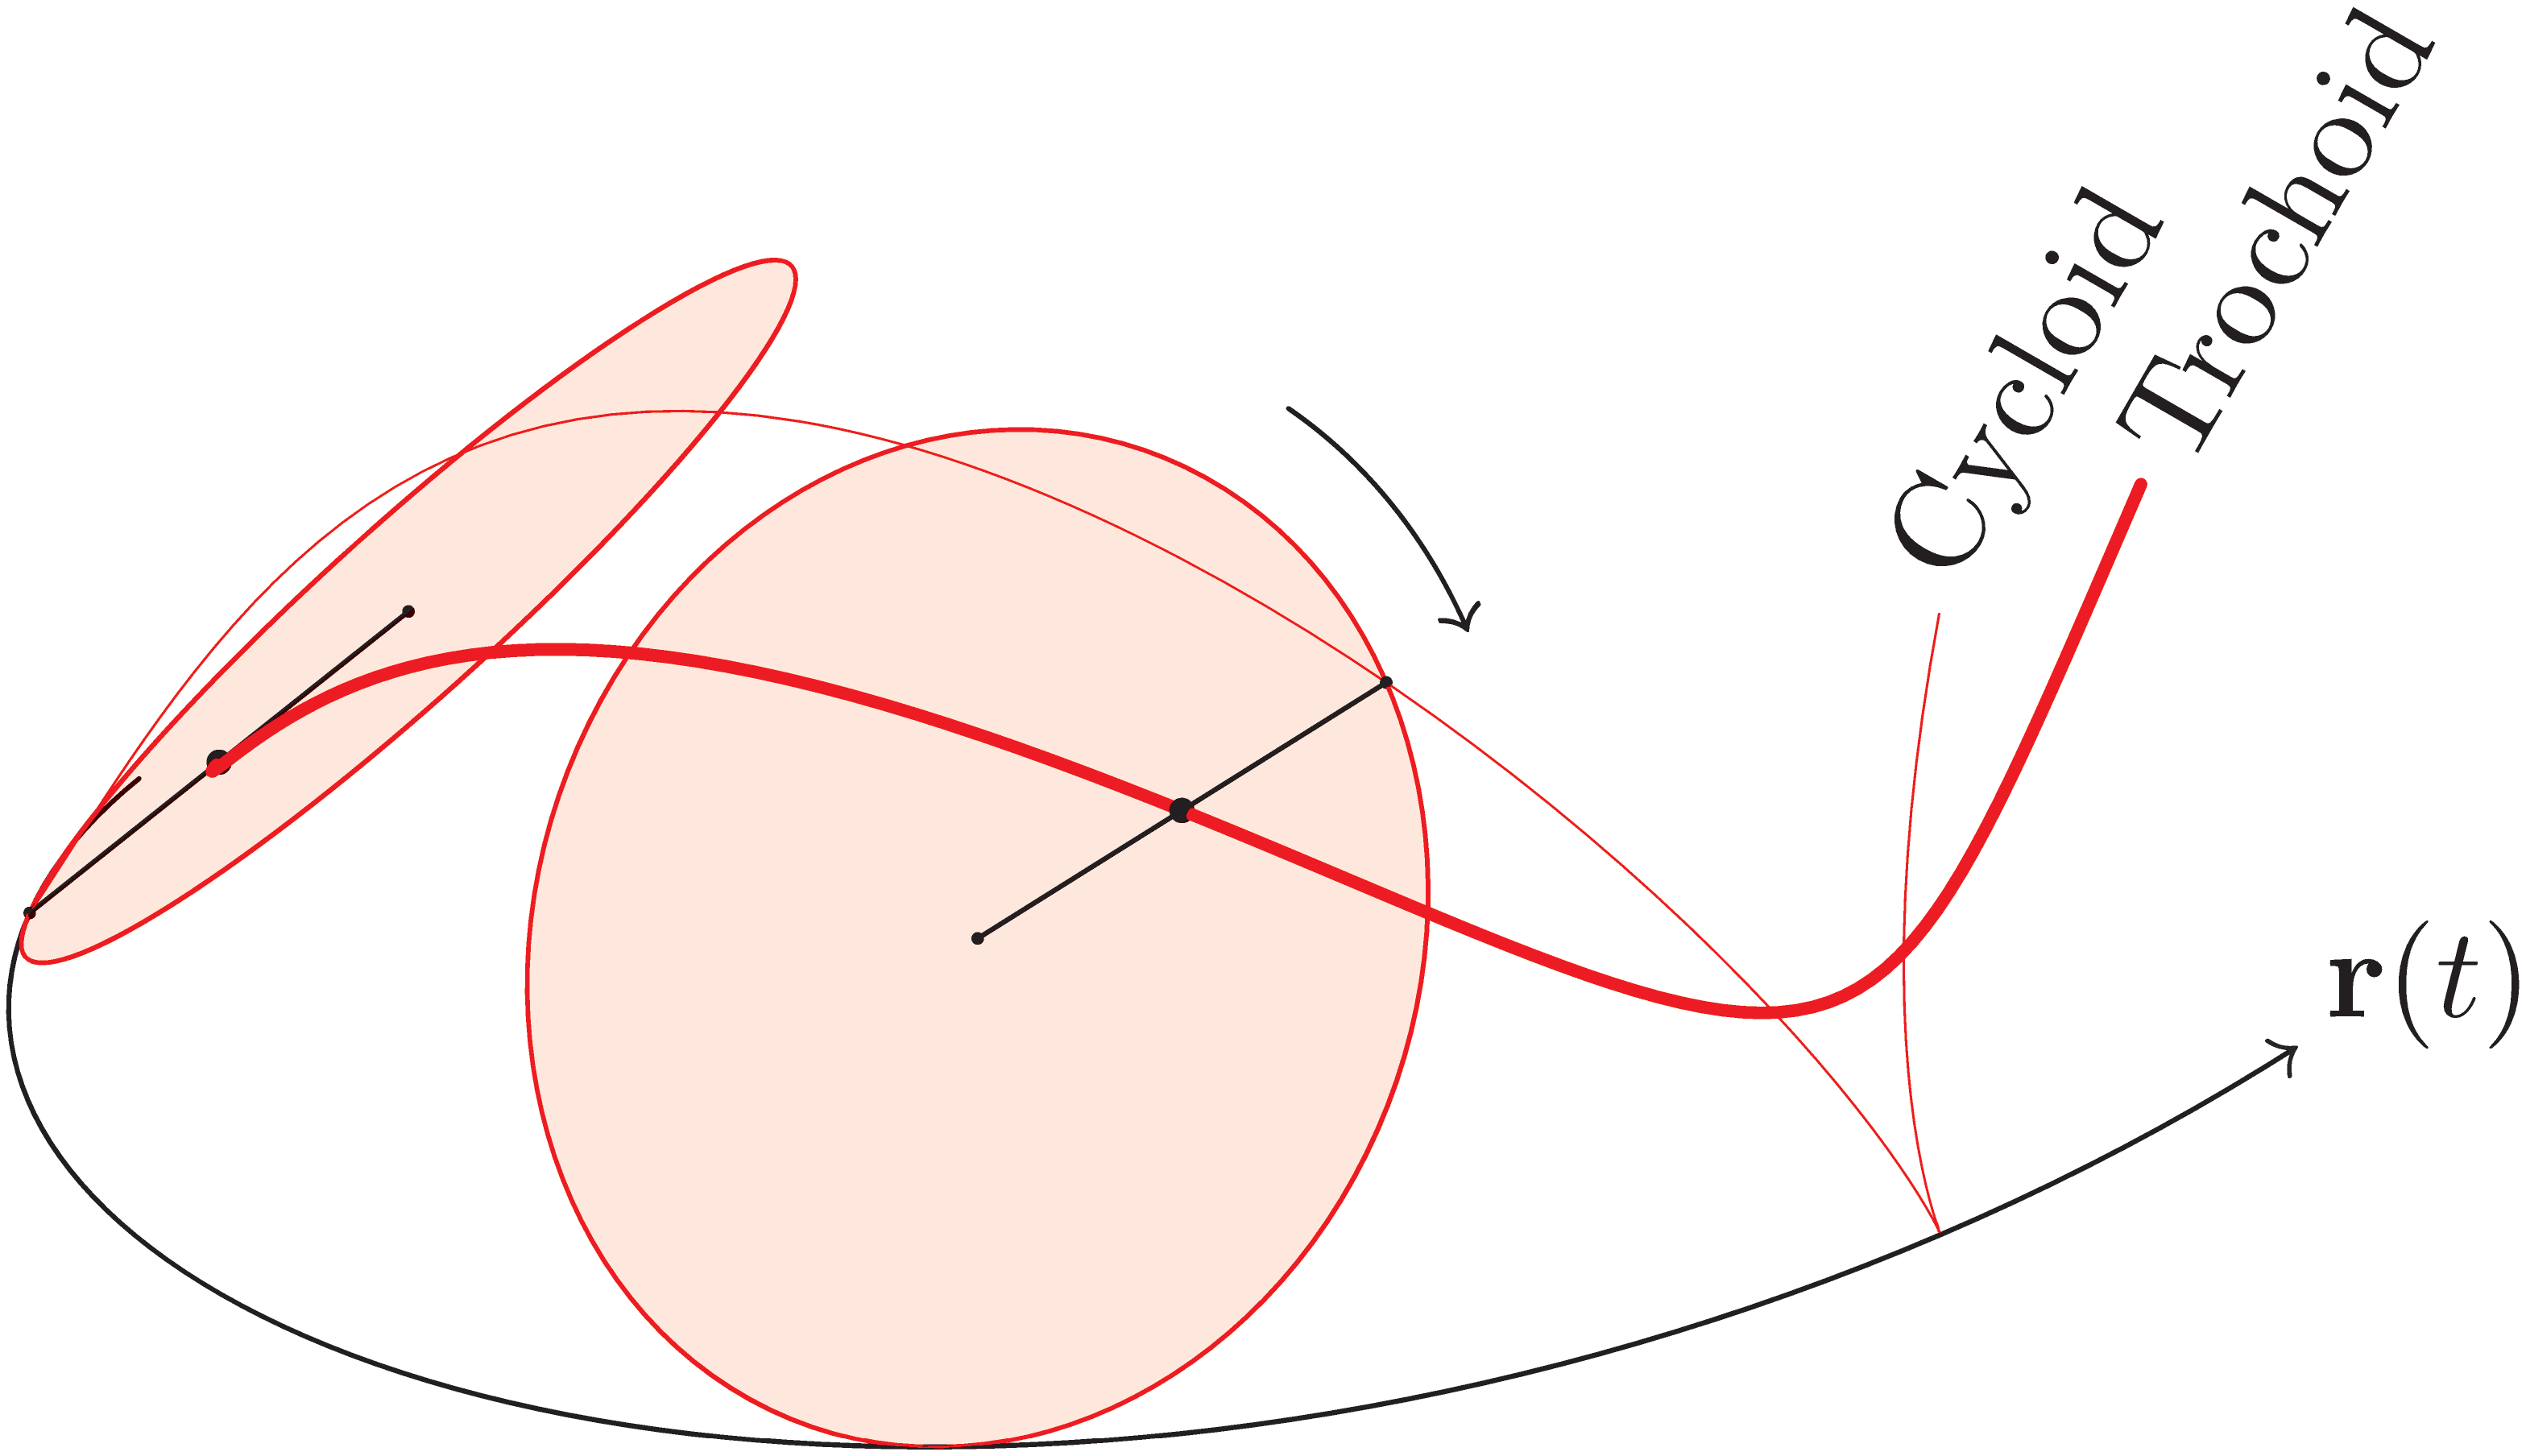 A cycloid and a trochoid on a curve